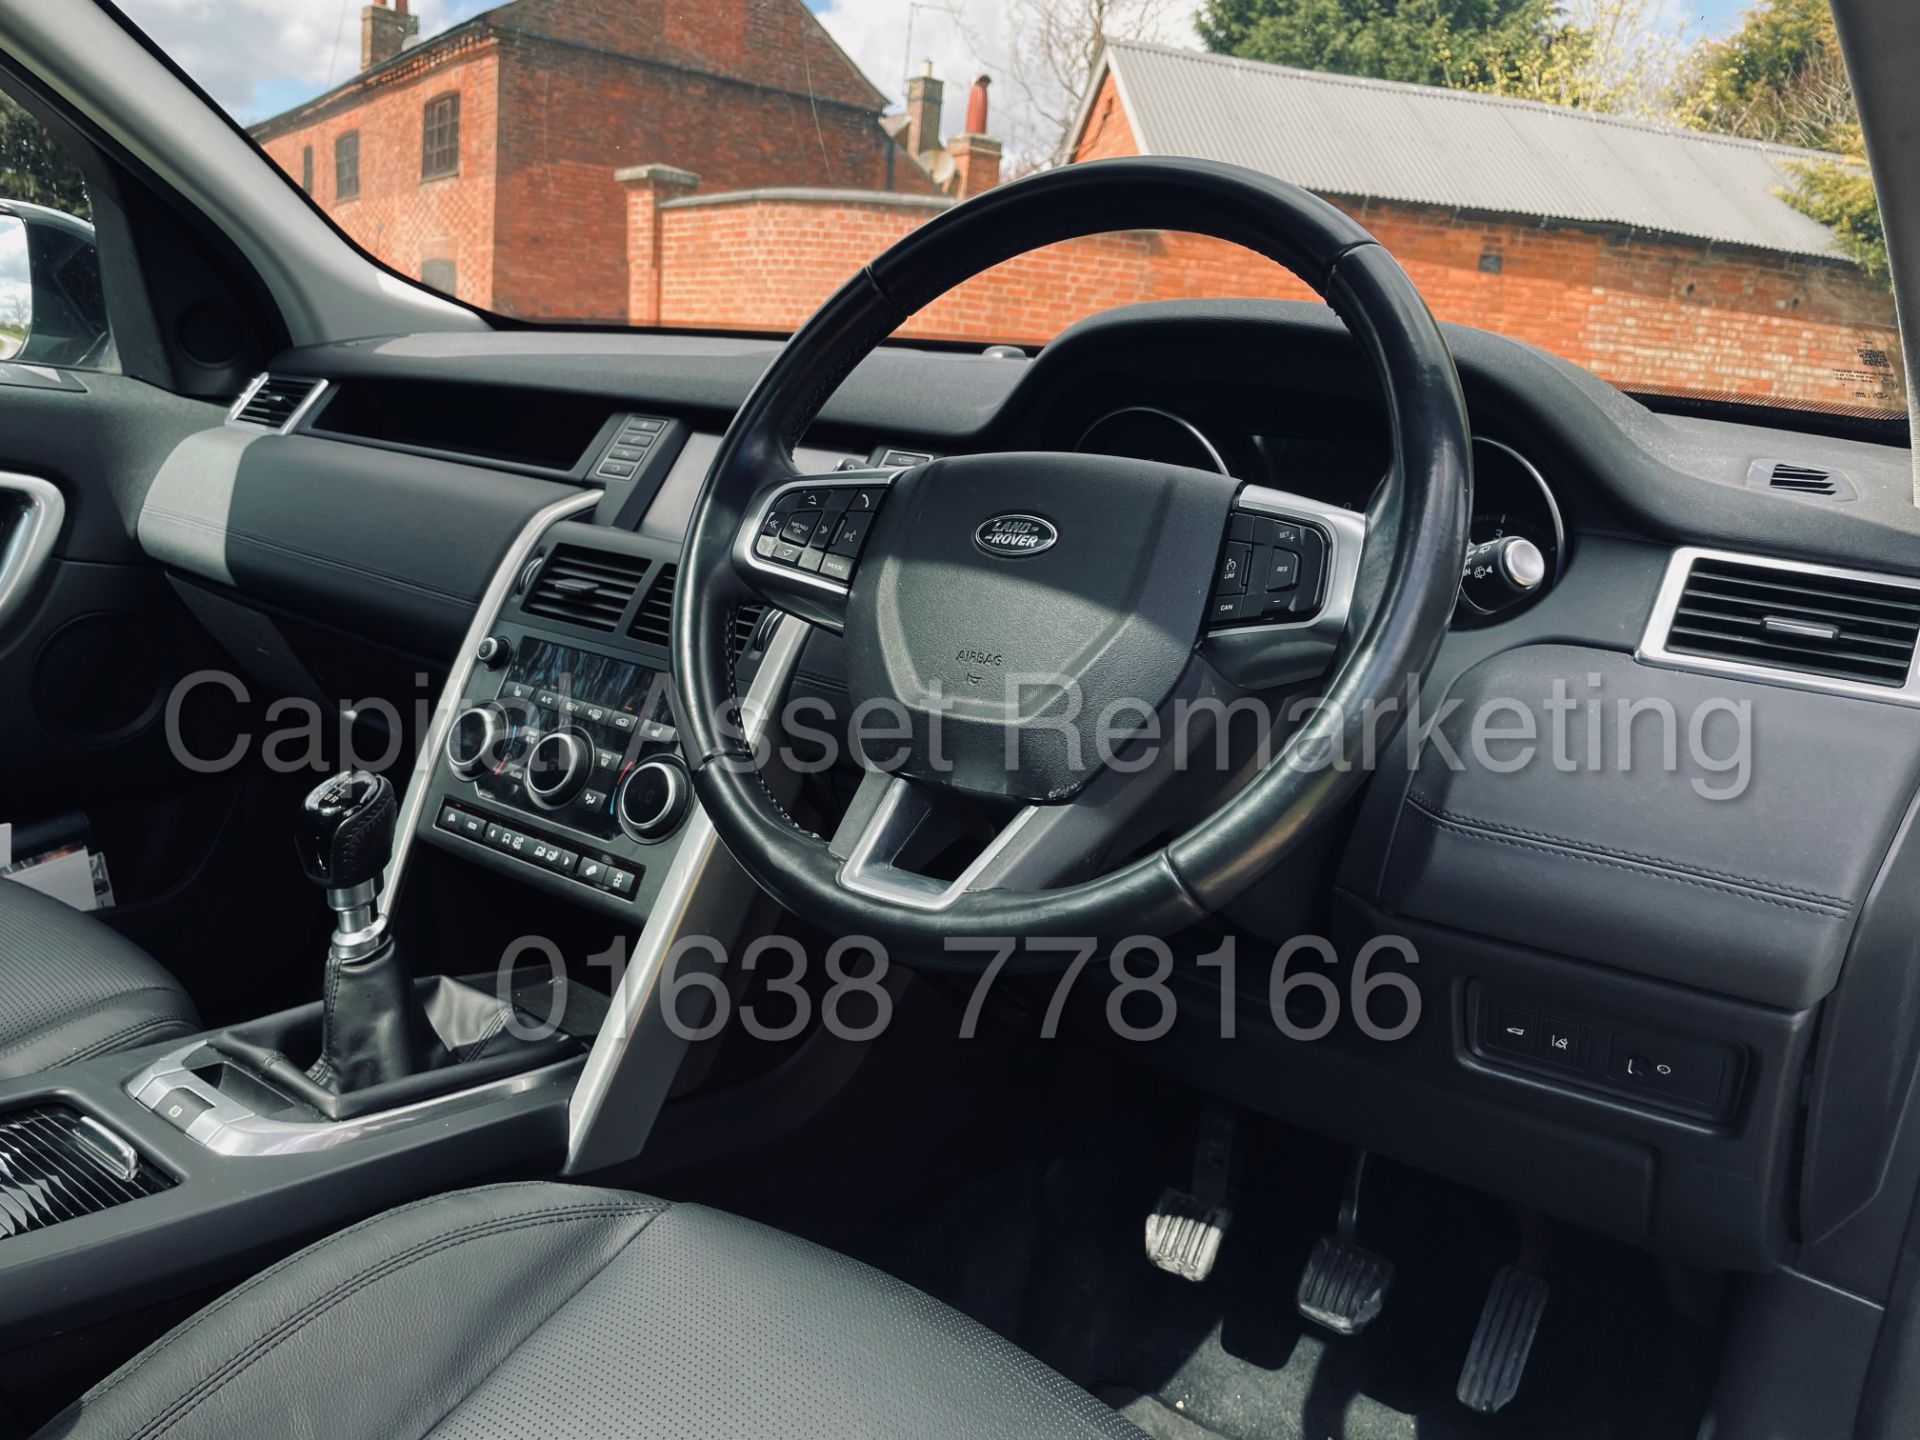 (On Sale) LAND ROVER DISCOVERY SPORT *HSE* SUV (66 REG - 2.0 TD4) *LEATHER - PAN ROOF - SAT NAV* - Image 40 of 55